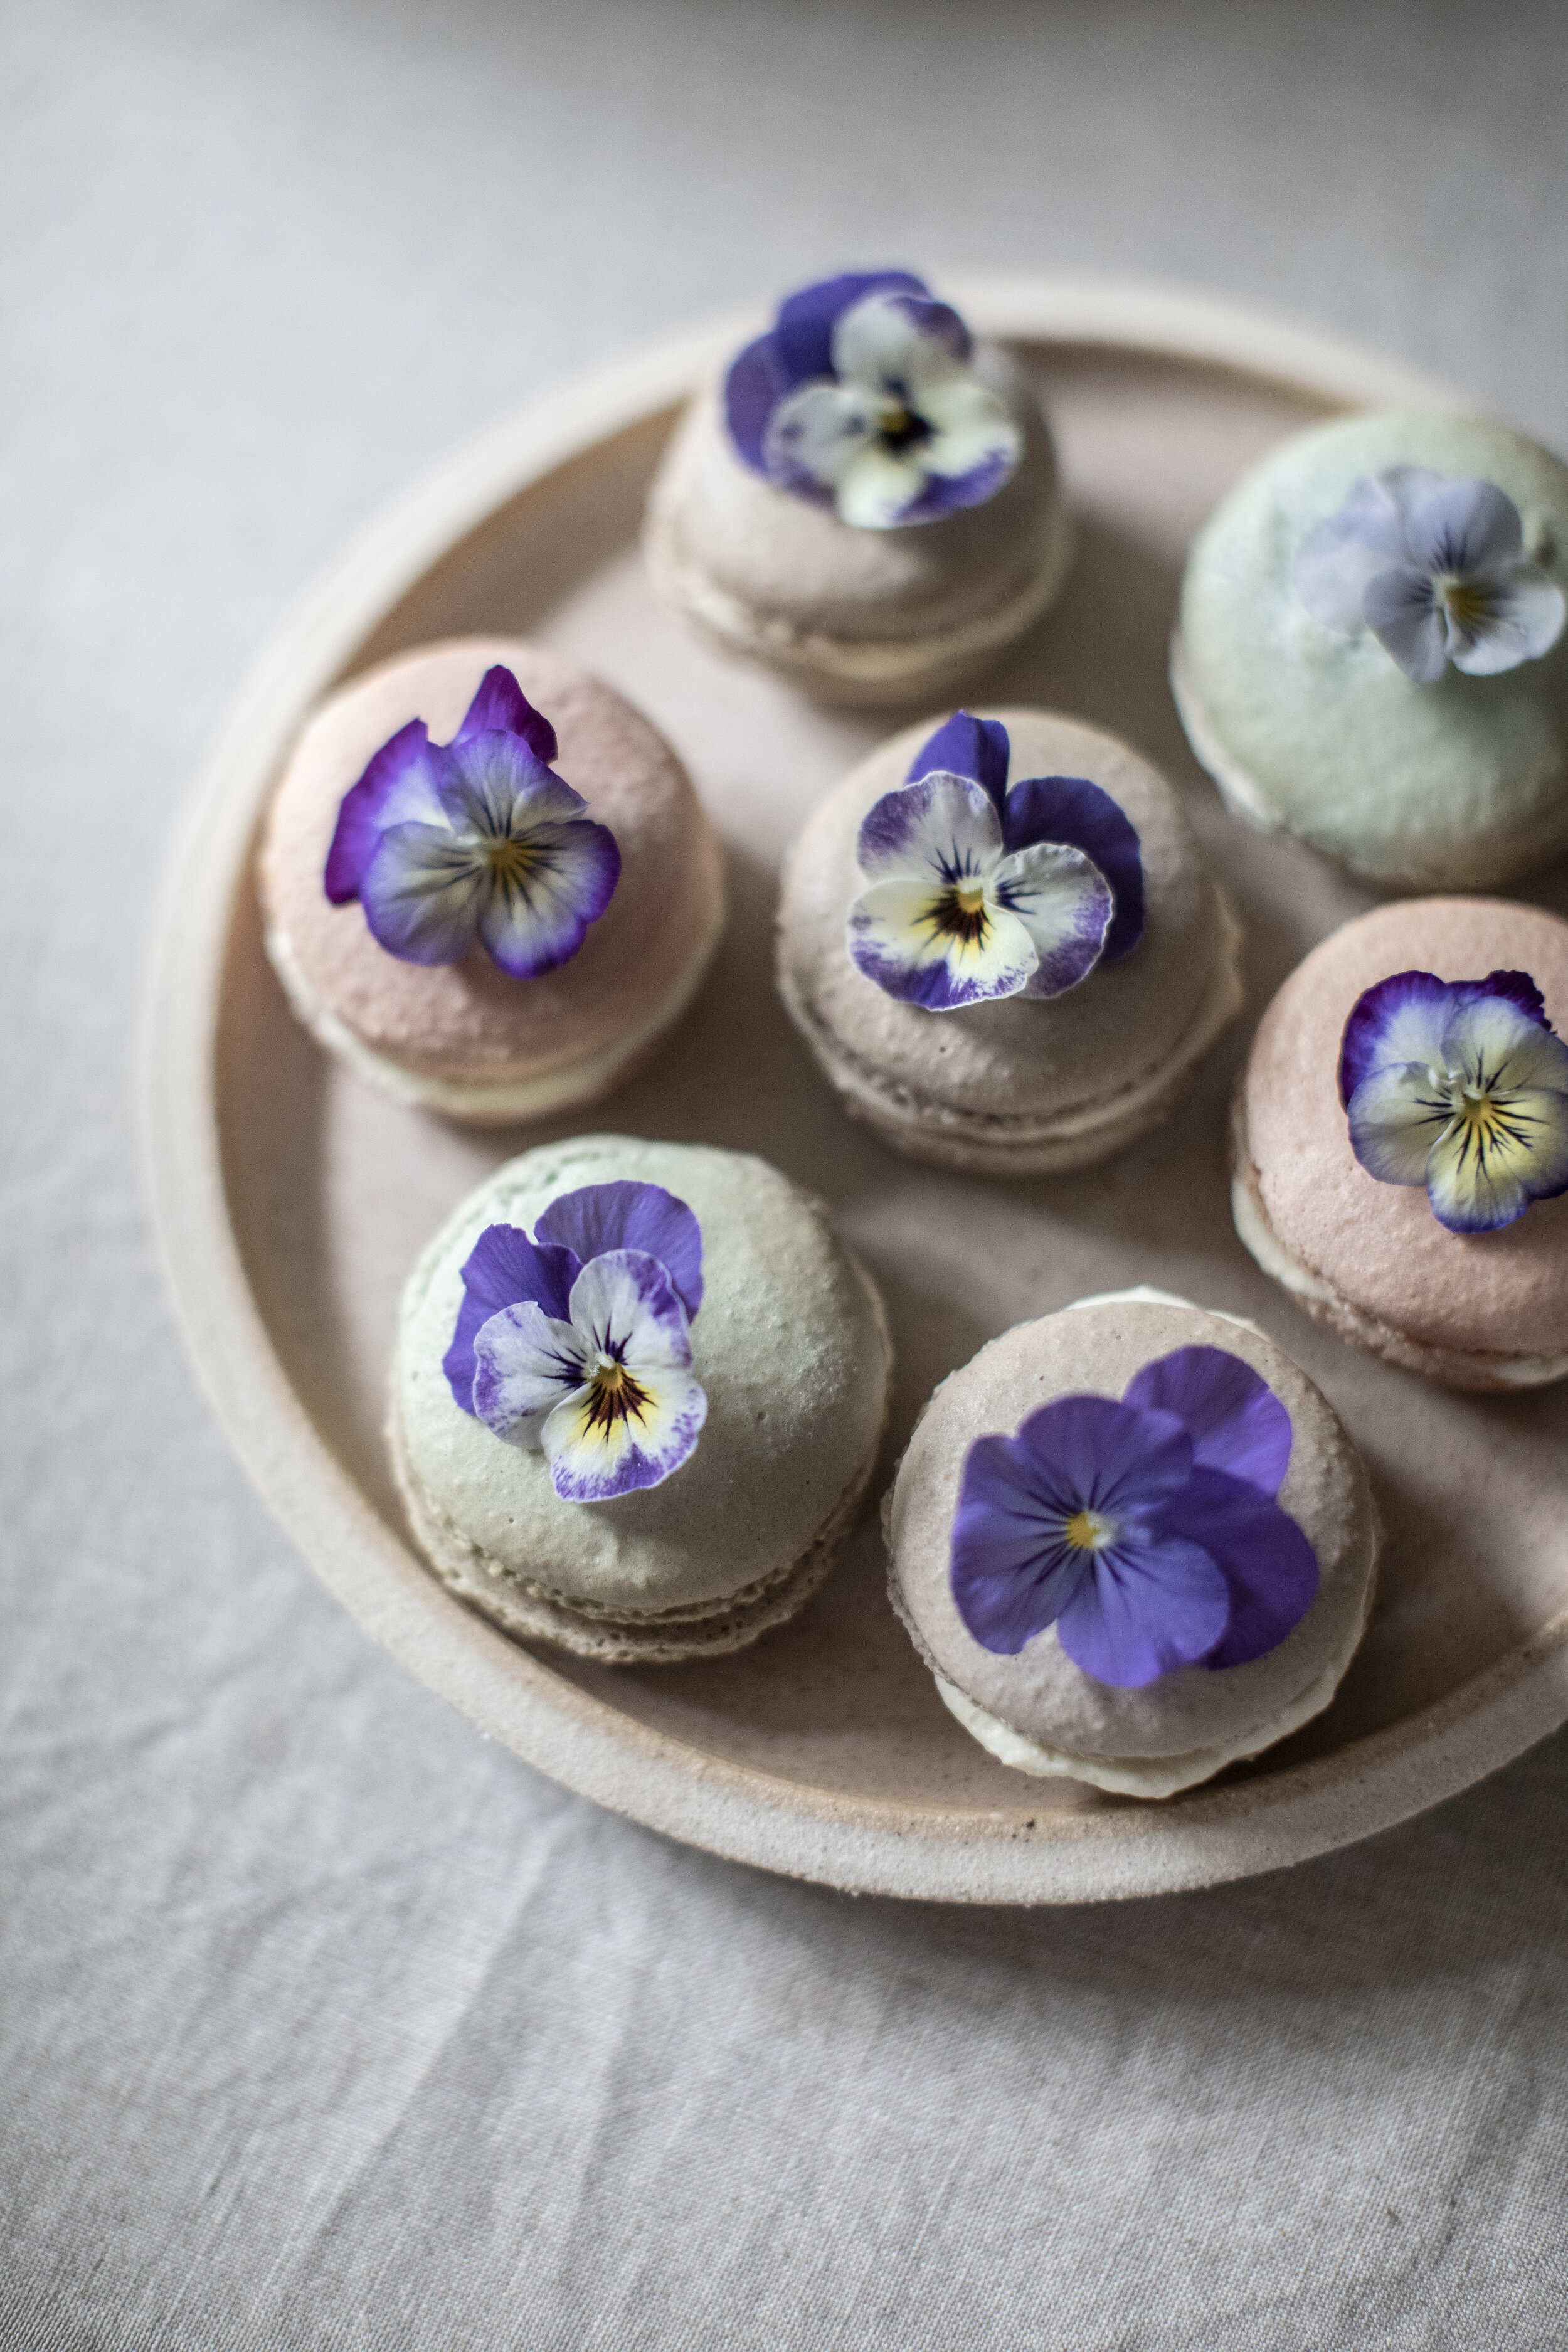 how to use edible flowers in baking